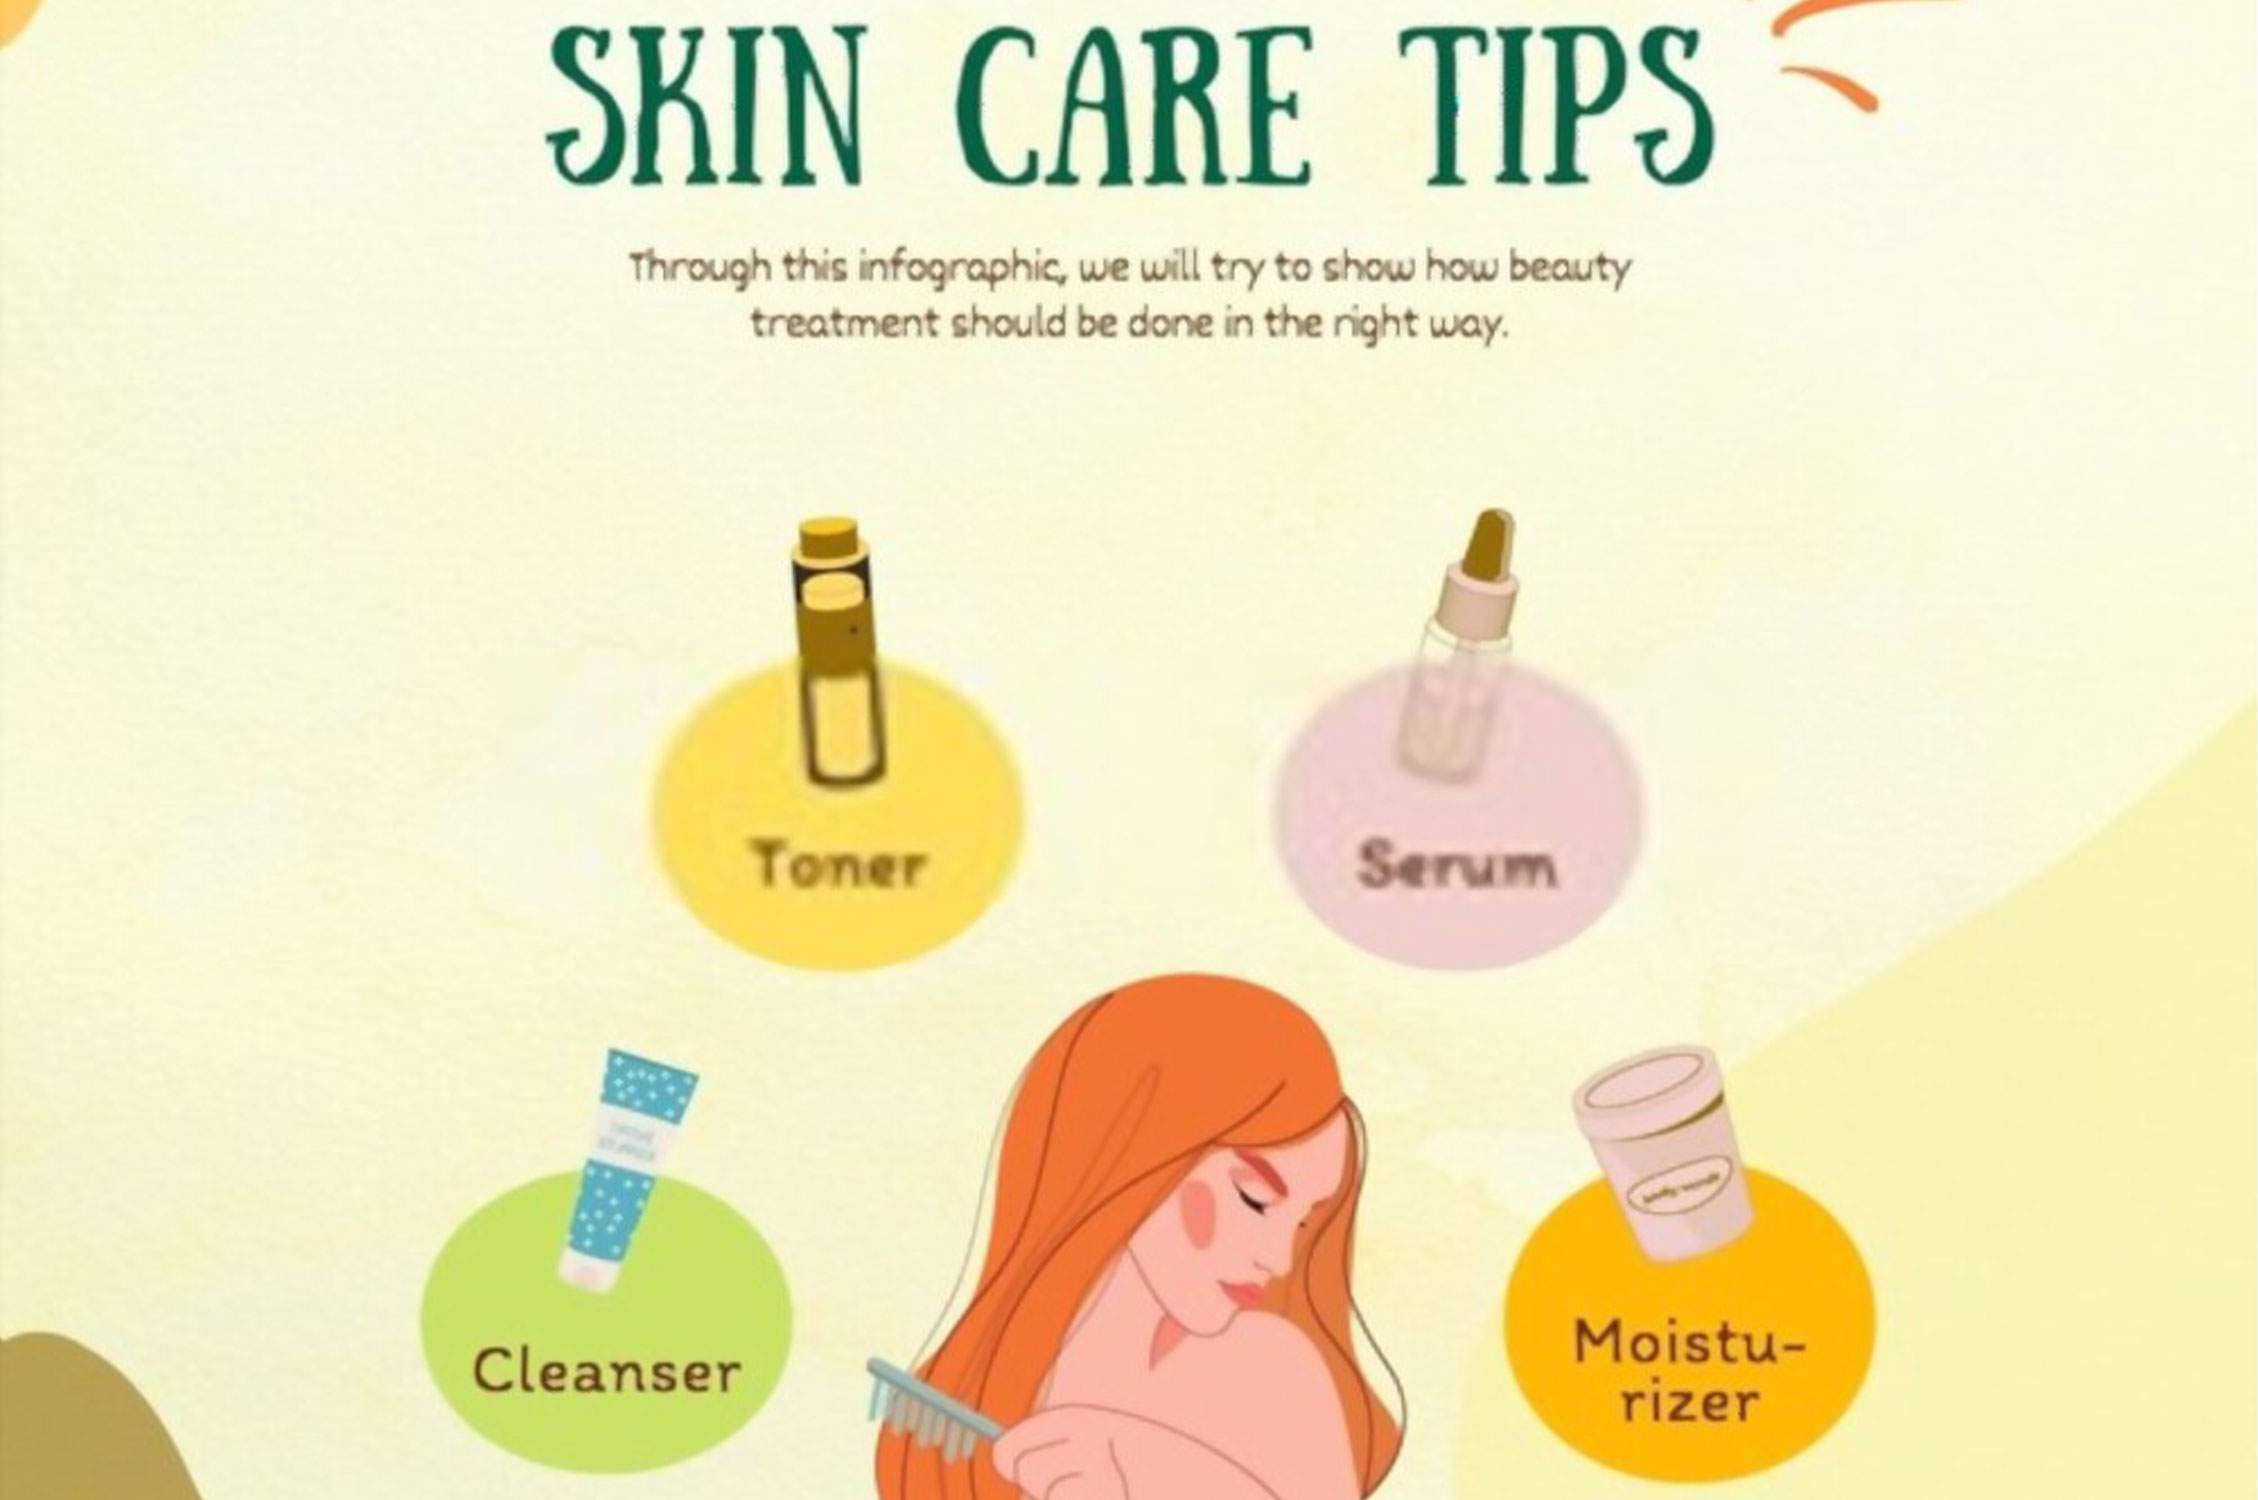 Skin care tips for healthy skin